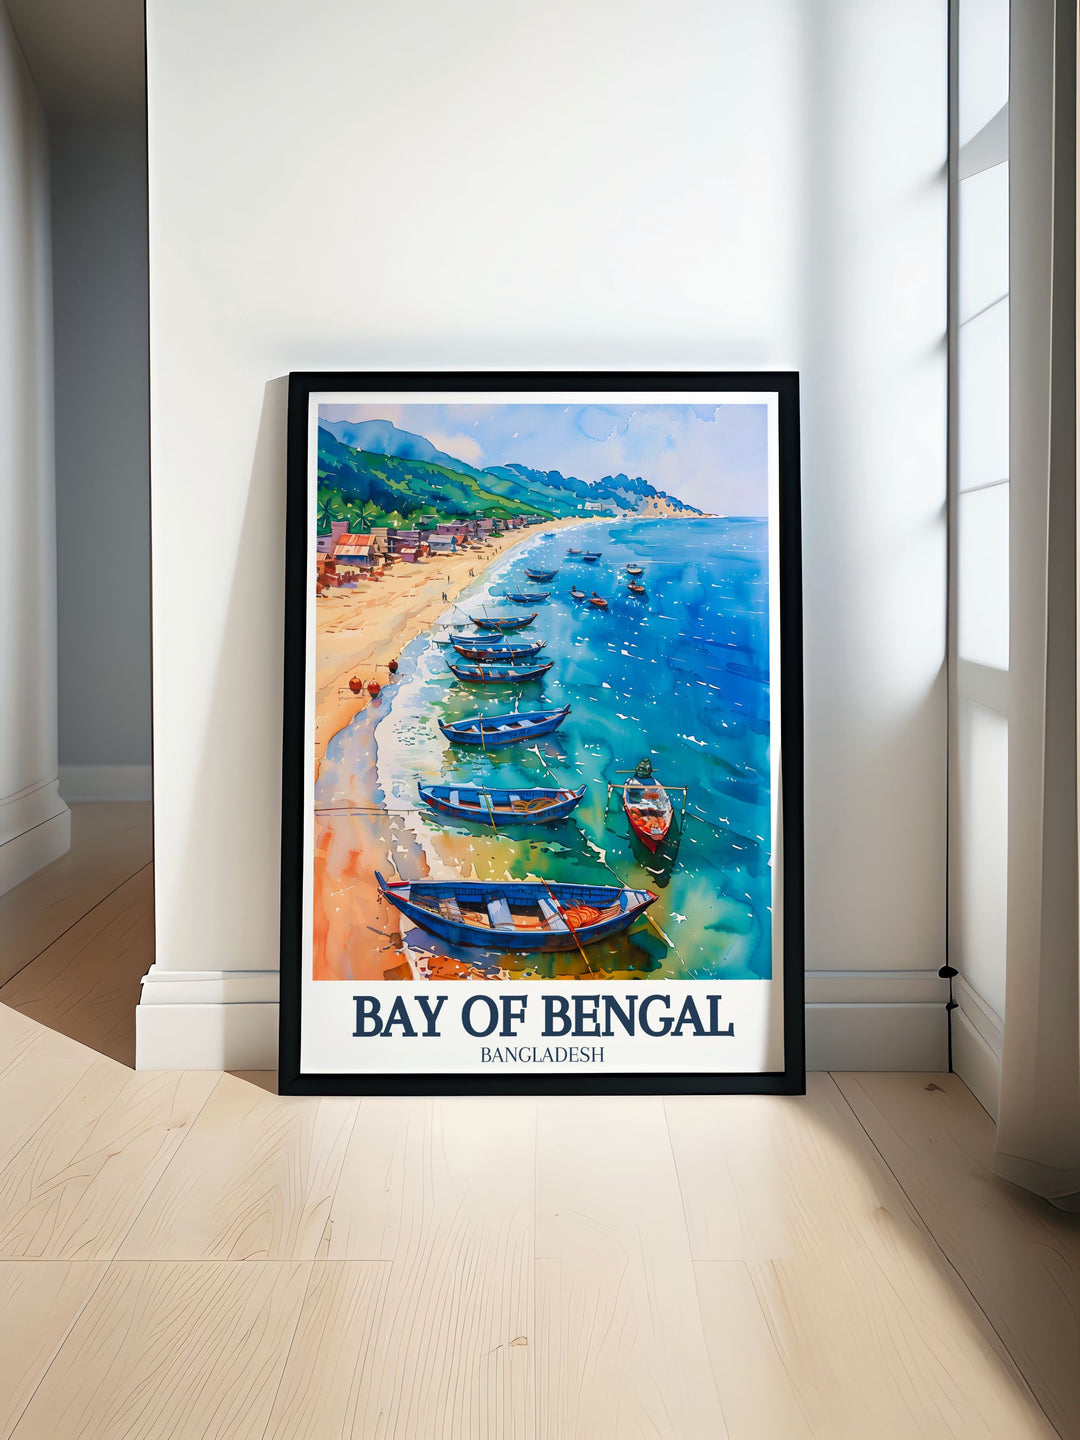 Vibrant Buriganga river, Dhaka, Bay of Bengal colorful art print capturing the lively spirit of the river and cityscape perfect for adding cultural richness and color to your home decor.